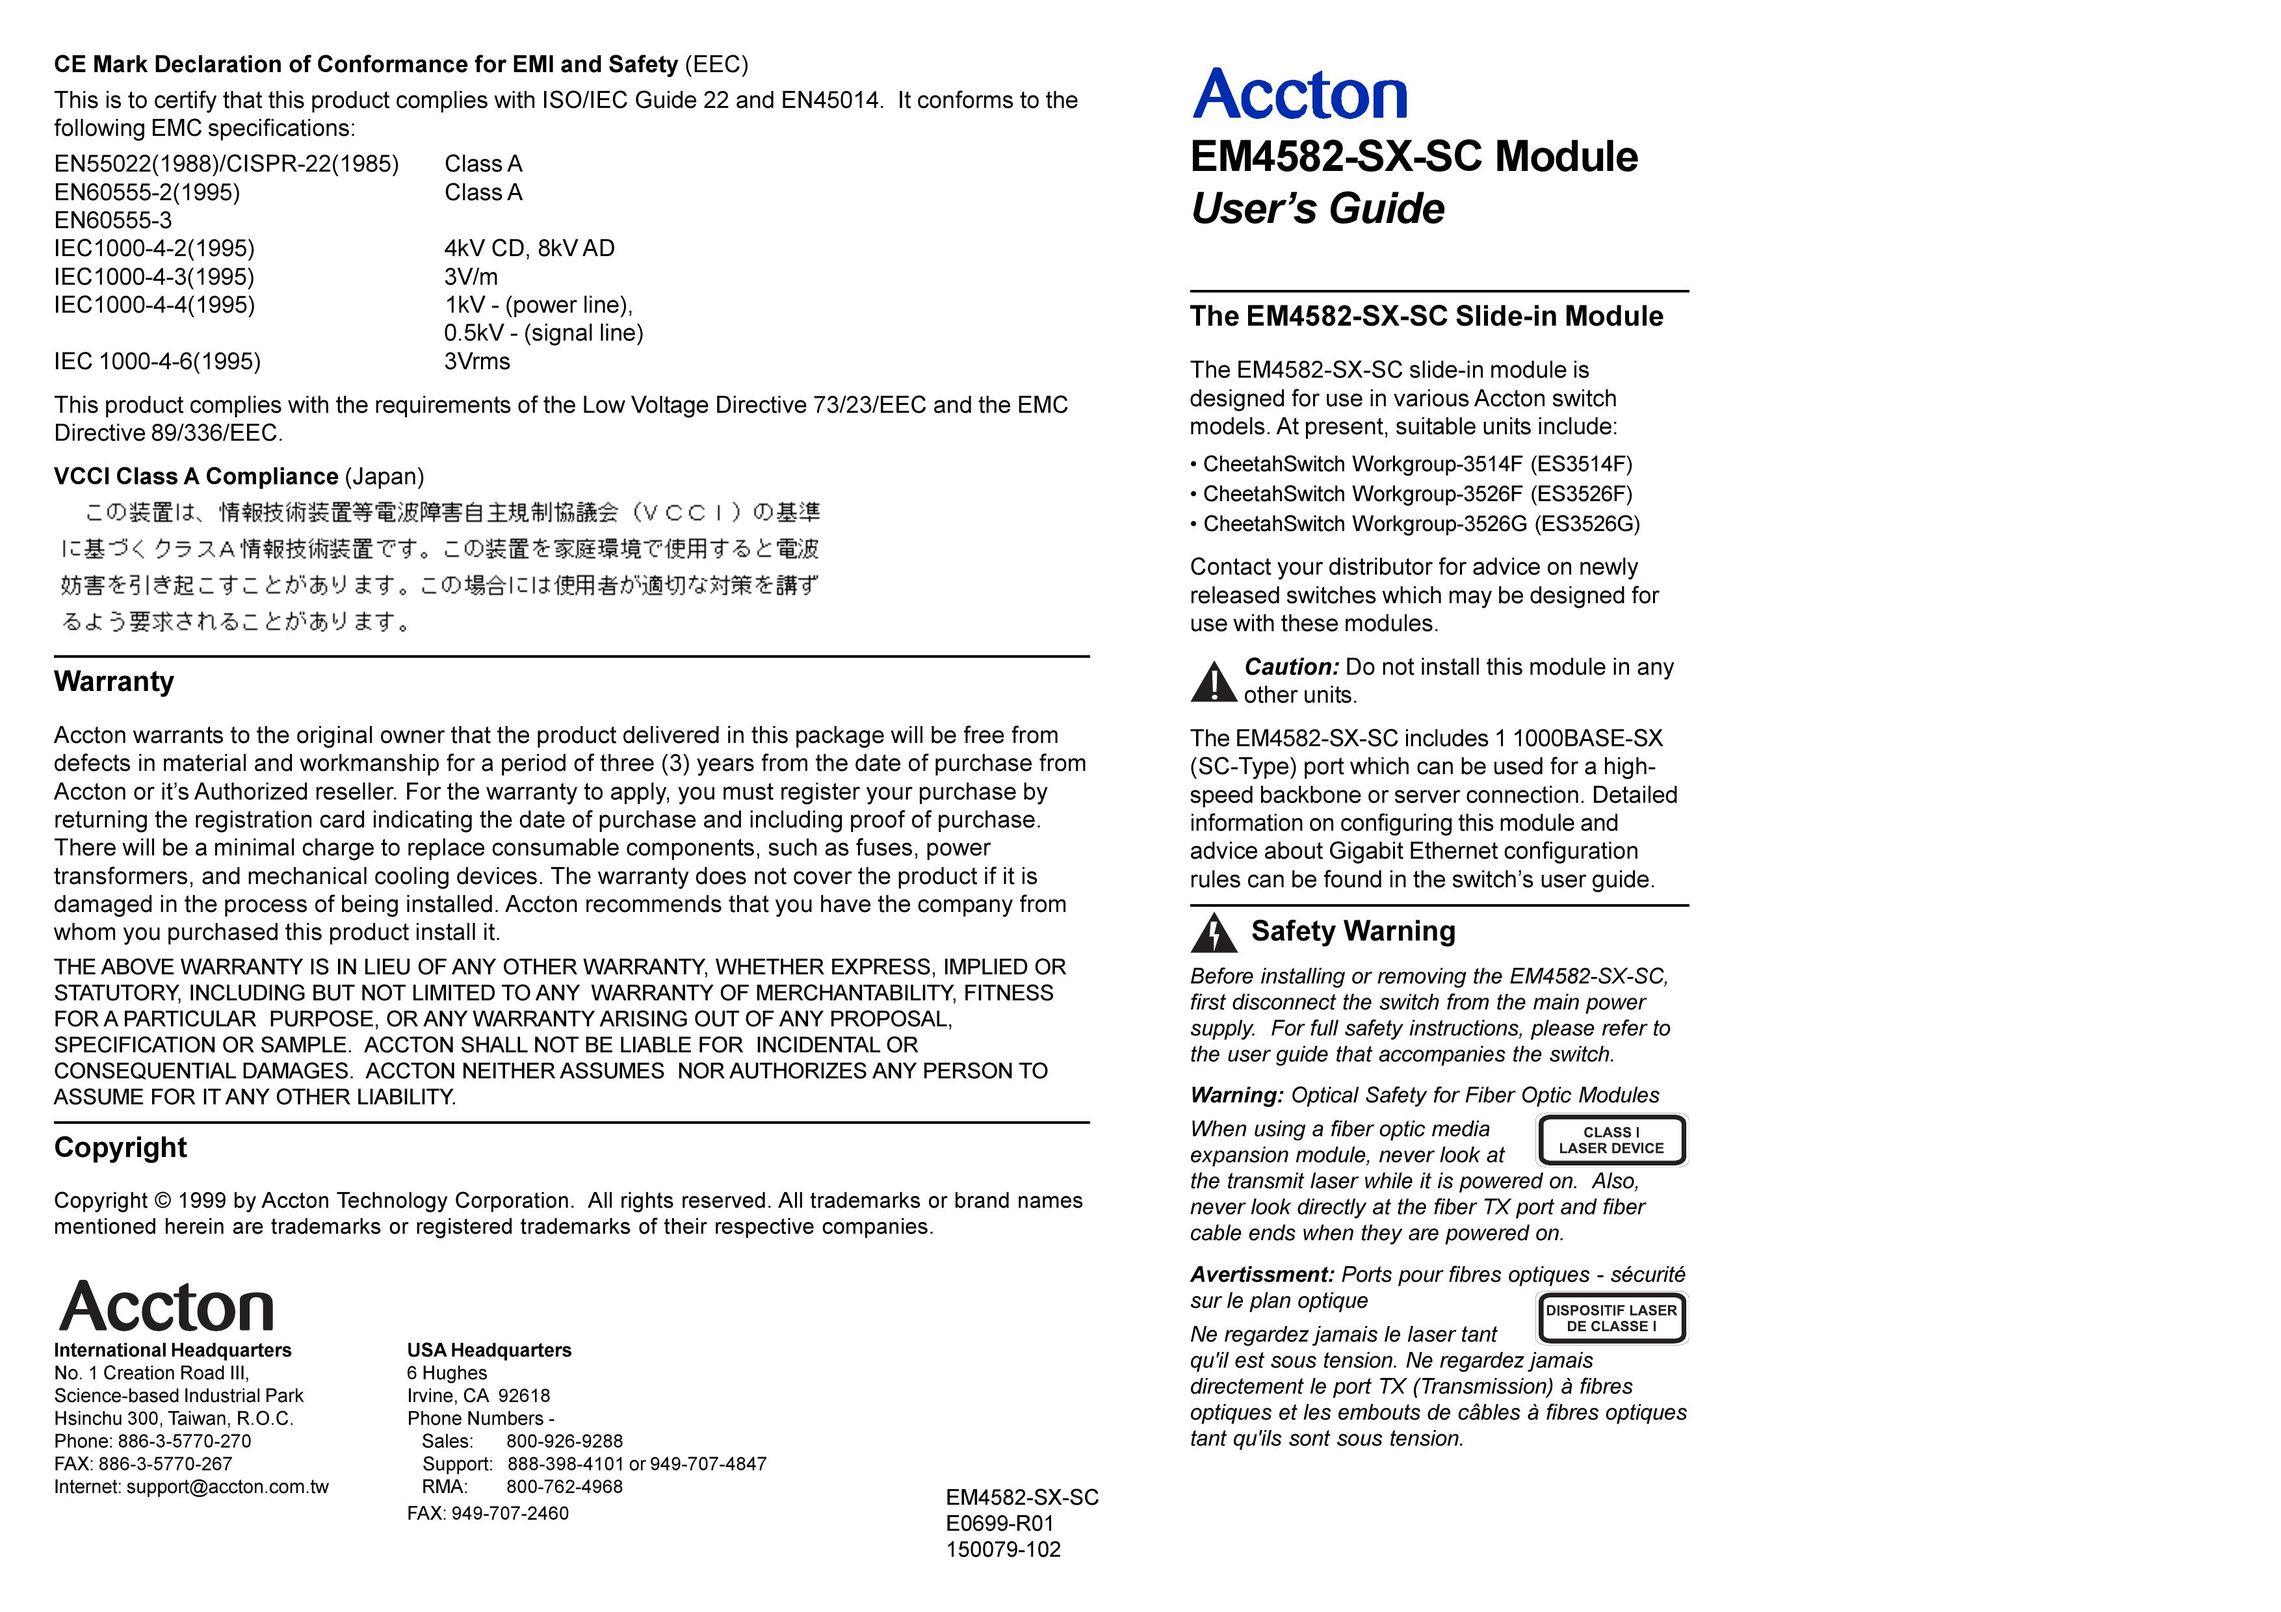 Accton Technology Slide-in Module Computer Hardware User Manual